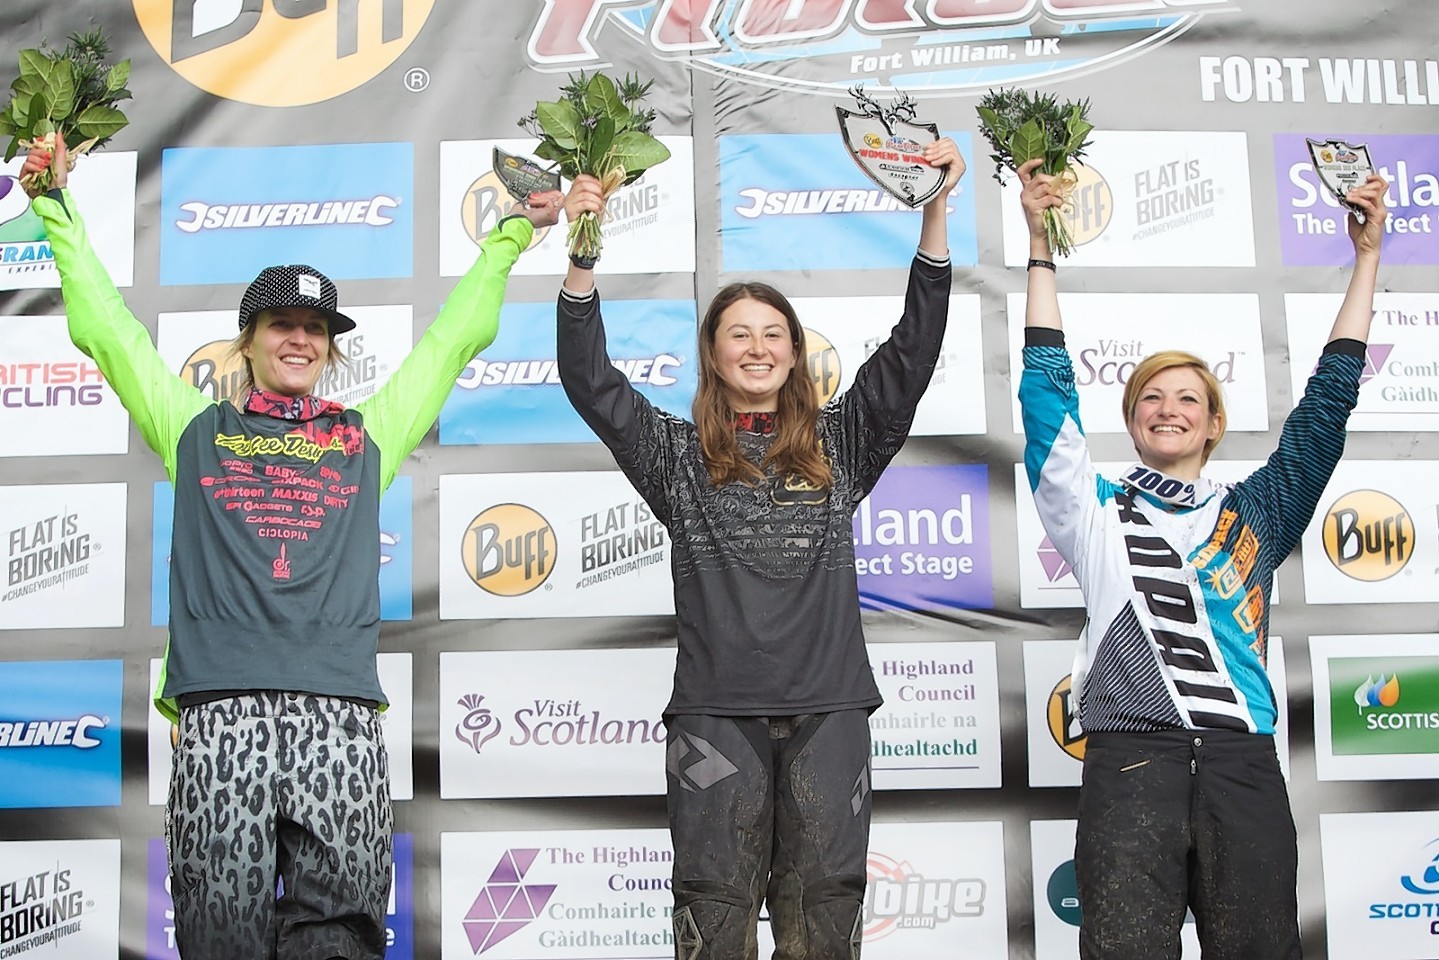 GB's Natasha Bradley (centre) is the winner of the Women's 4X Pro Tour event at Fort William.